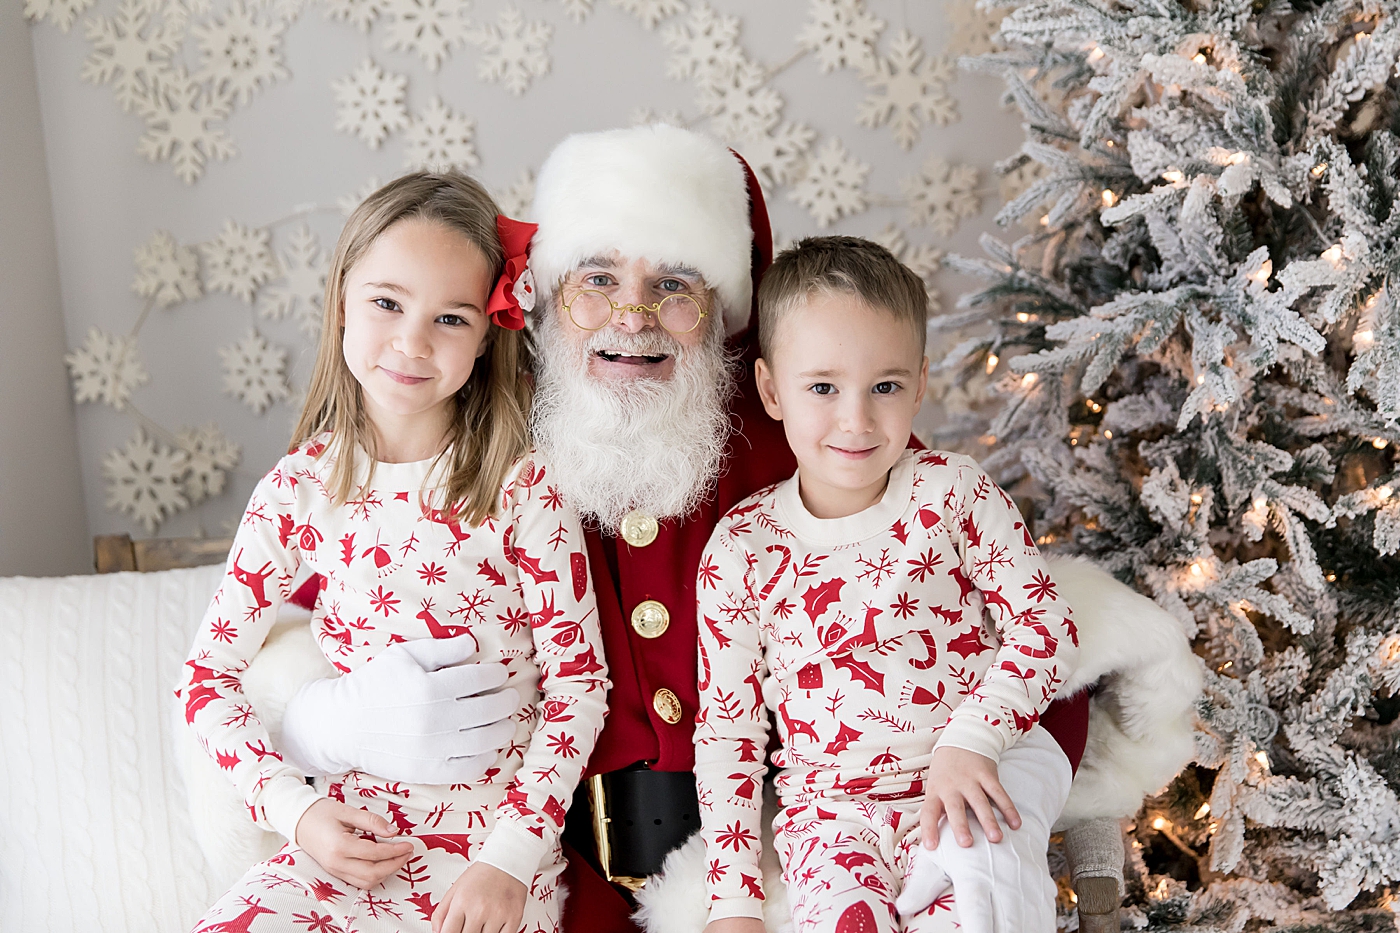 Brother and sister sitting on Santa's lap. Photo by Fresh Light Photography.